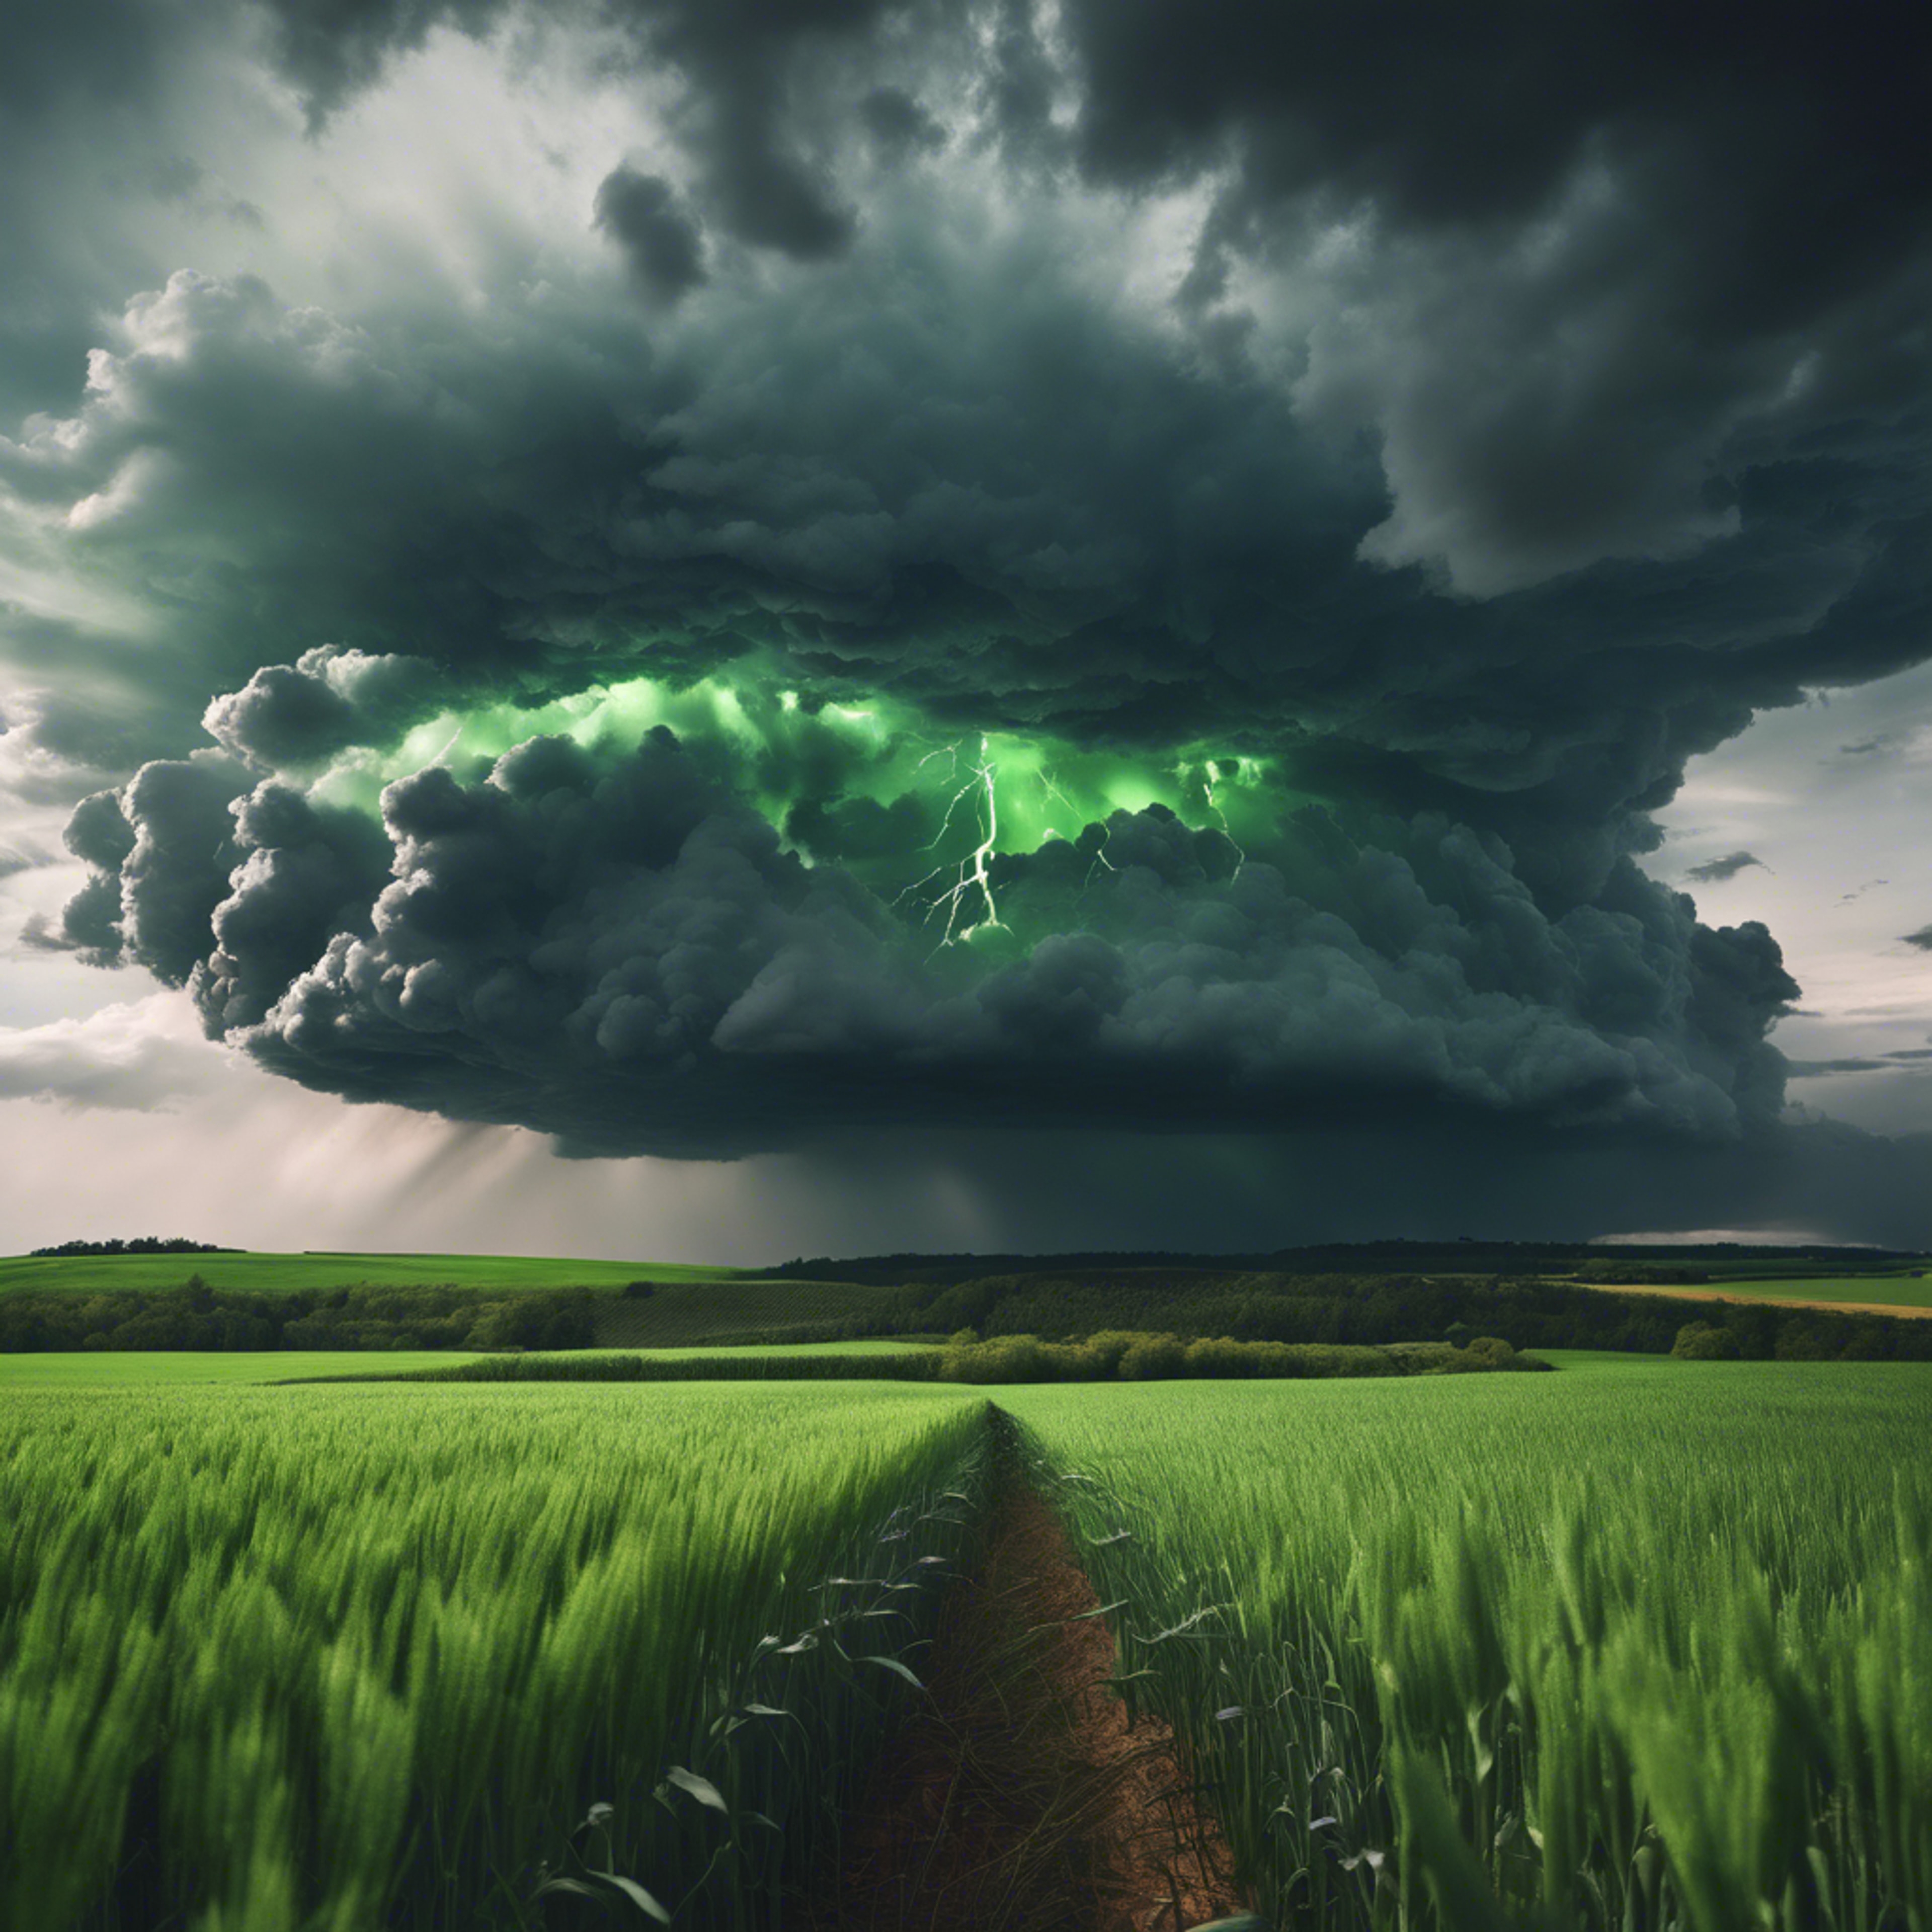 A dramatic black storm cloud over a vibrant green wheat field. Валлпапер[2ef08a34070042519f8d]